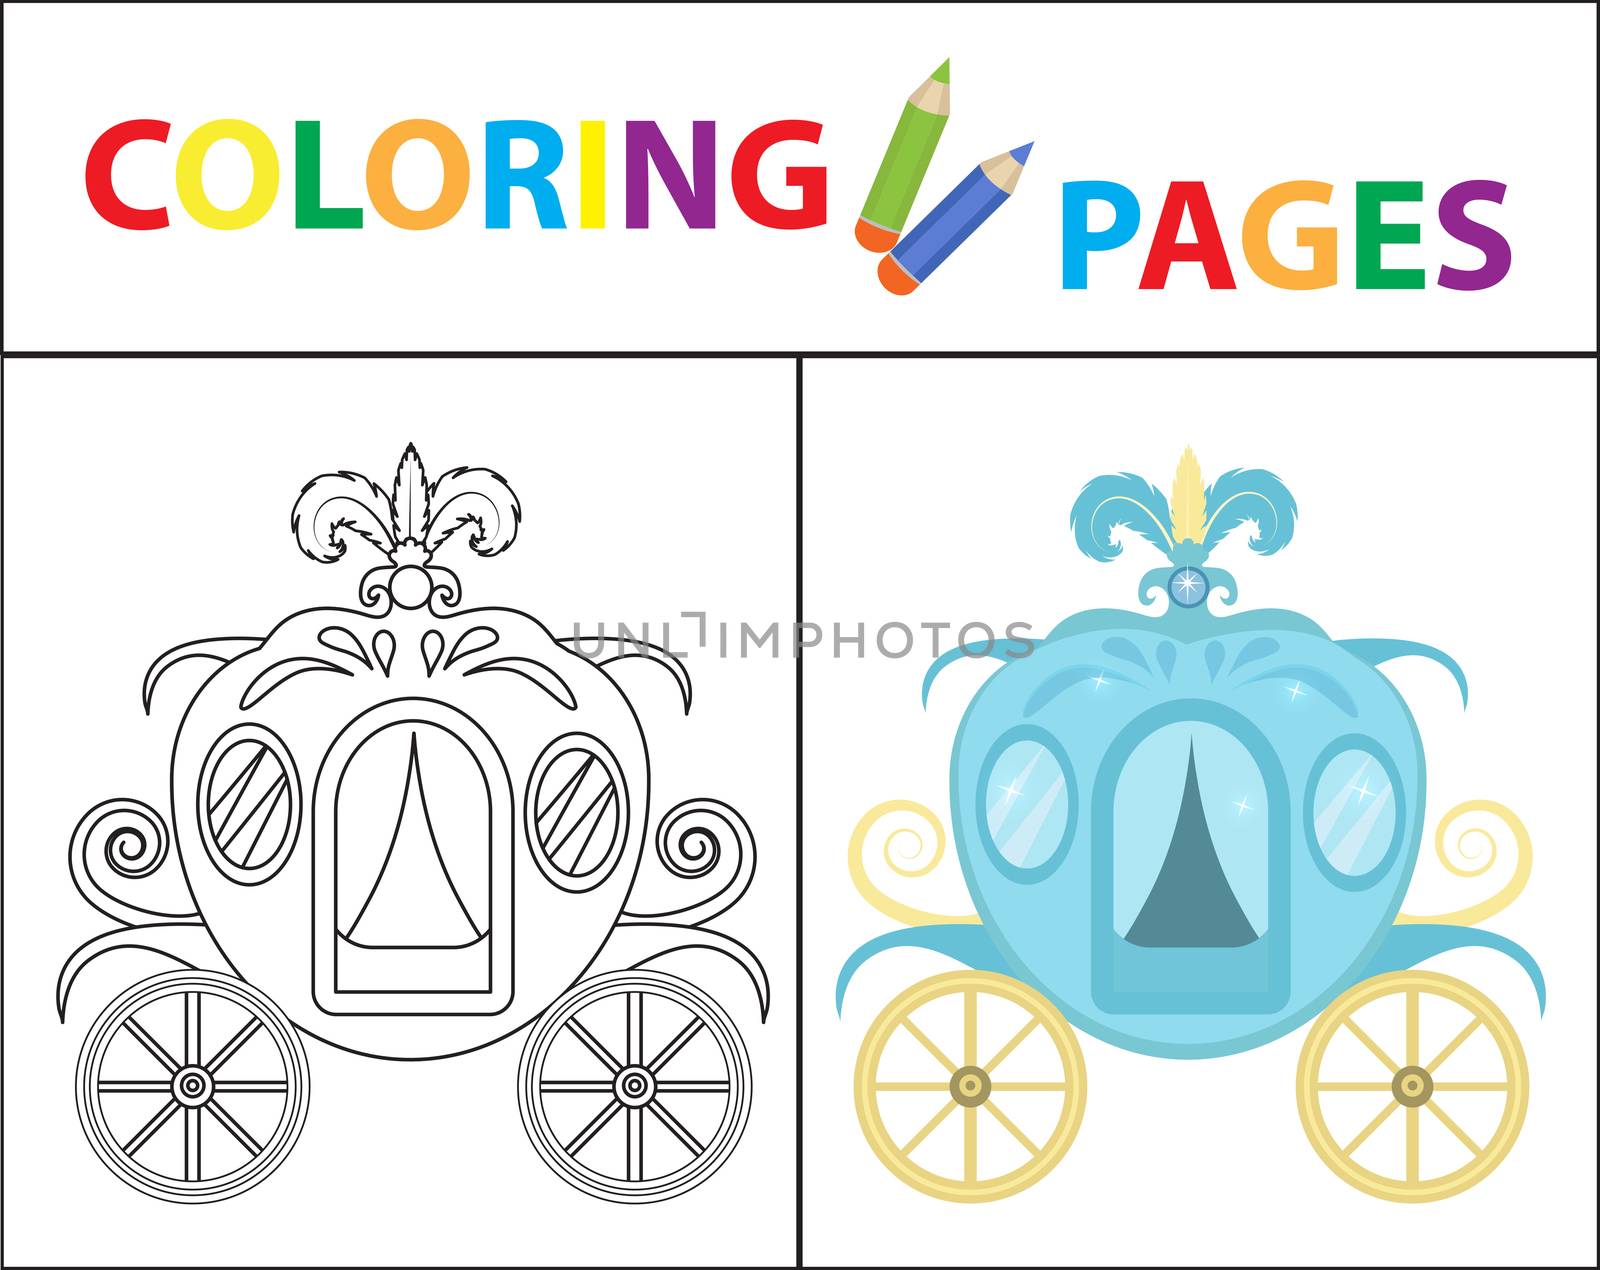 Coloring book page for kids. Cinderella carriage. Sketch outline and color version. Childrens education. illustration